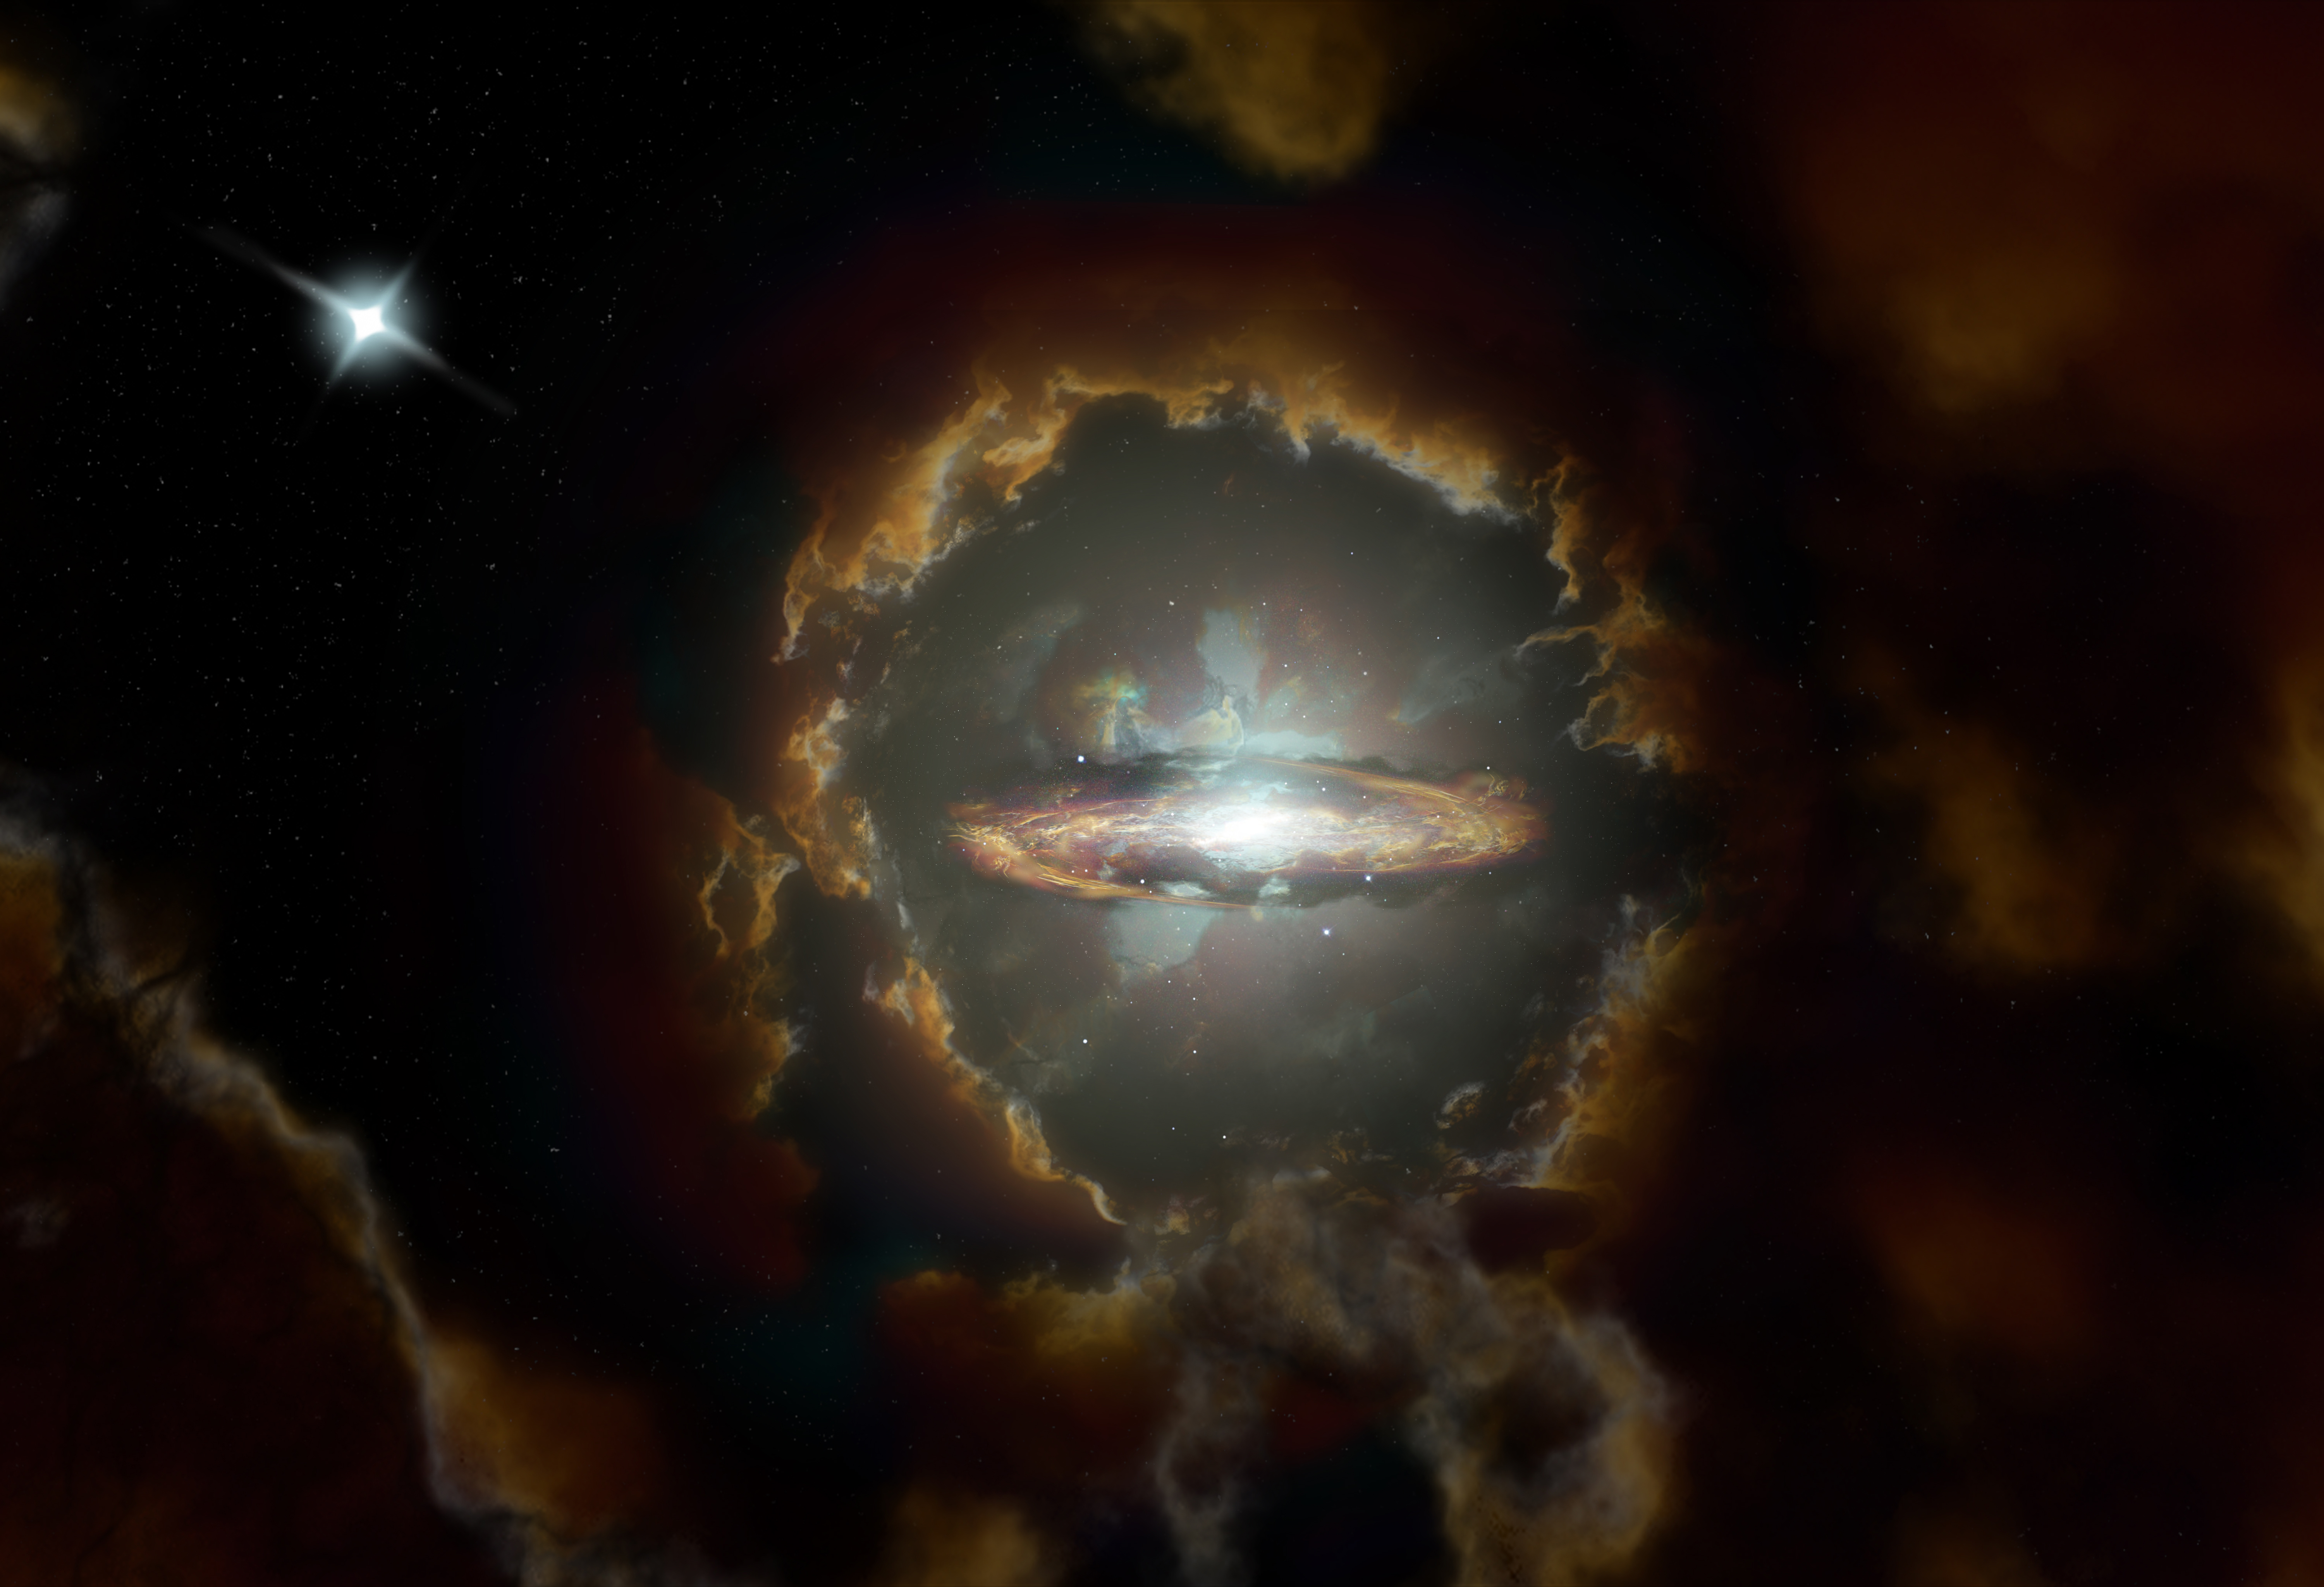 Newswise: ALMA Discovers Massive Rotating Disk in Early Universe